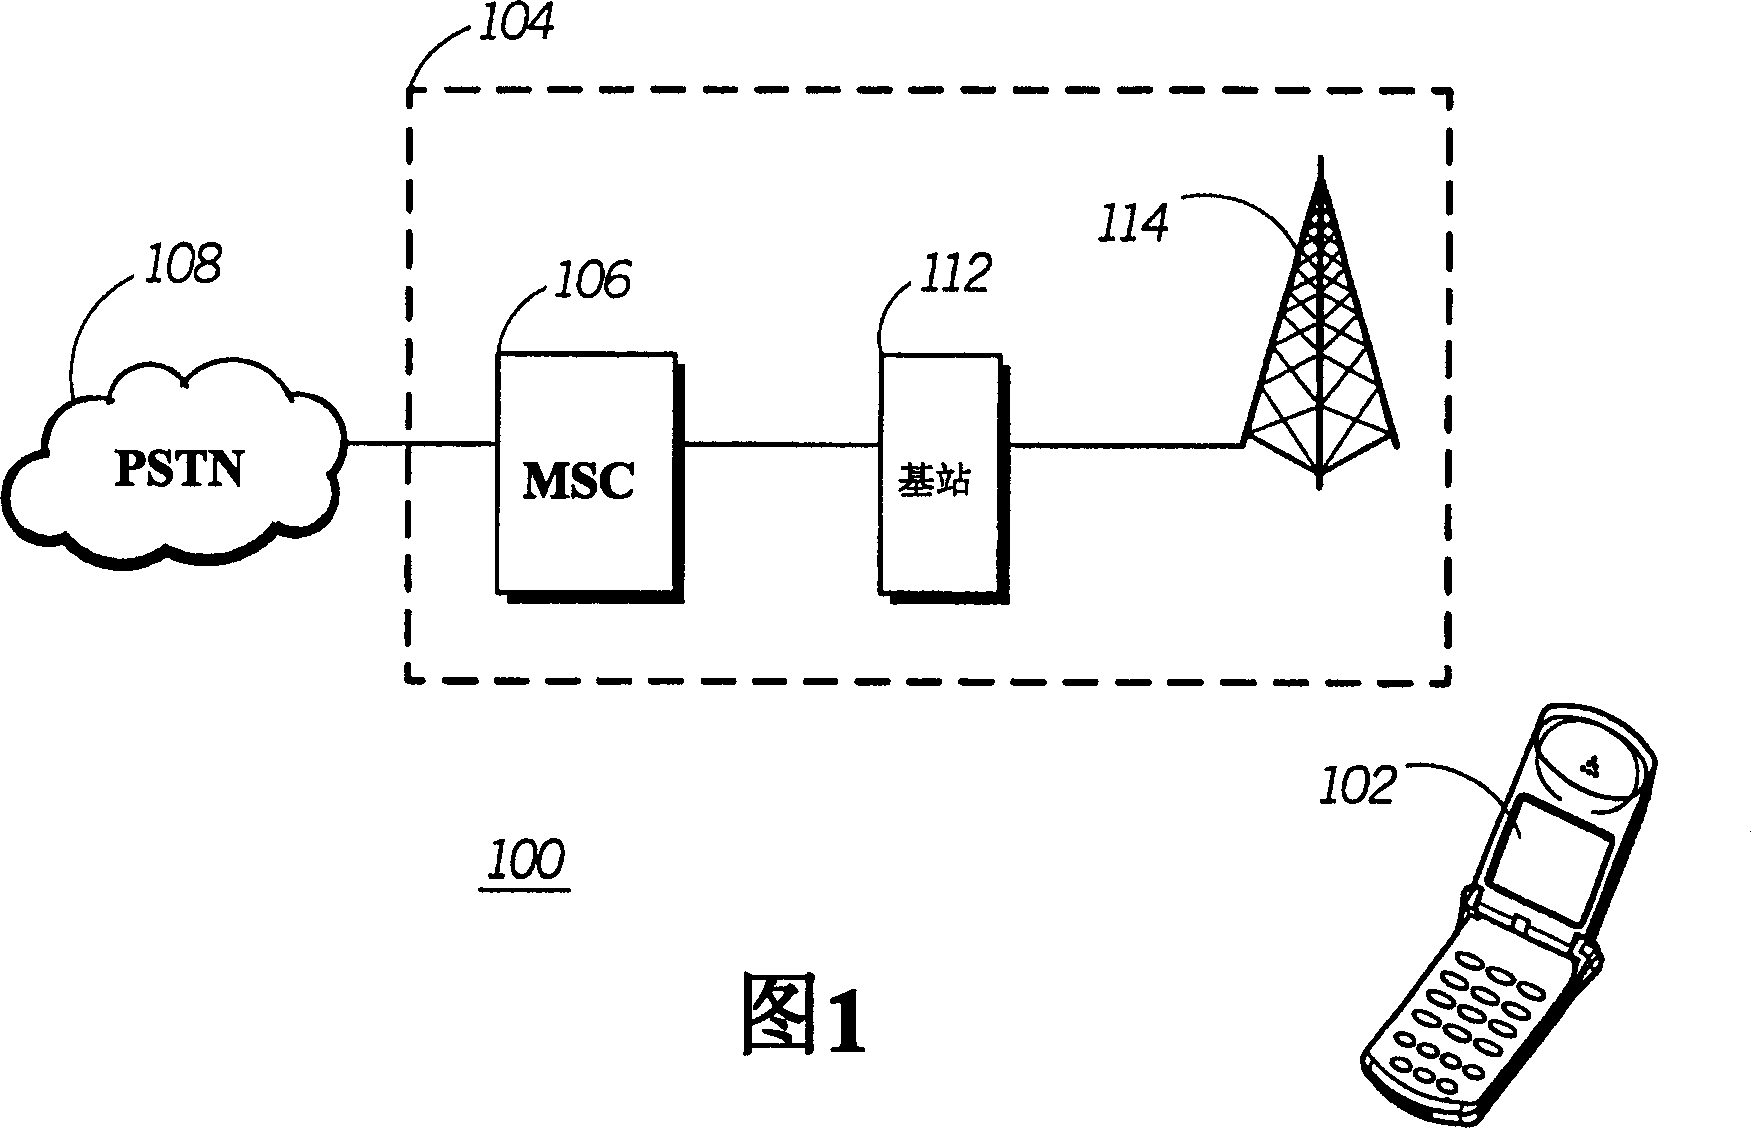 Method for fast dynamic estimation of background noise